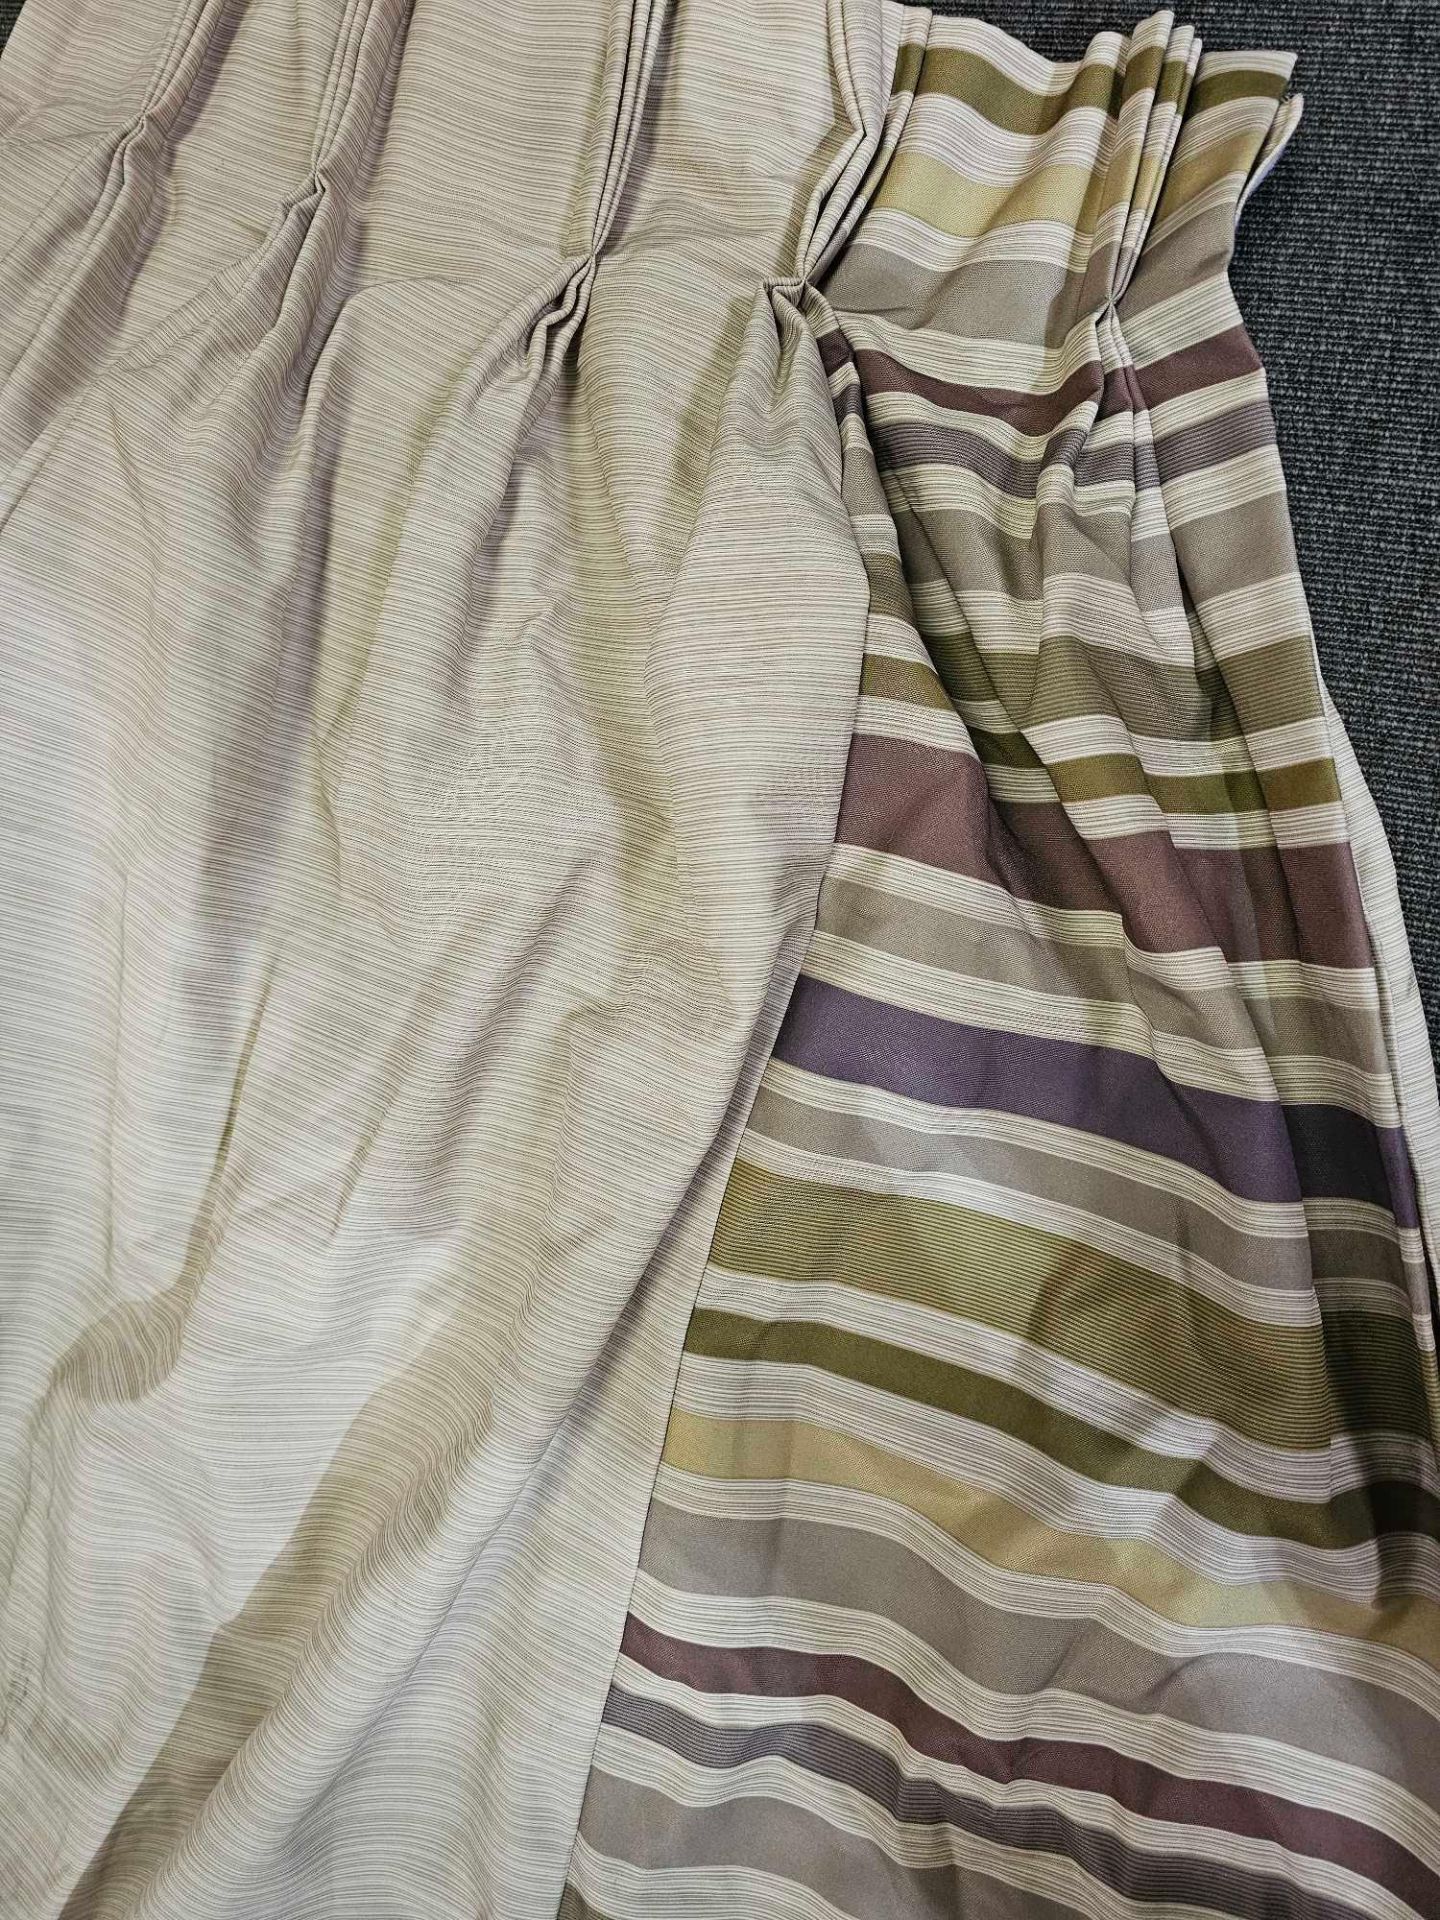 A Pair Of Curtains Striped Edge Purple/Green/Beige/Lime/Brown Size 284 x 250cm ( Ref Red 158) - Image 2 of 2